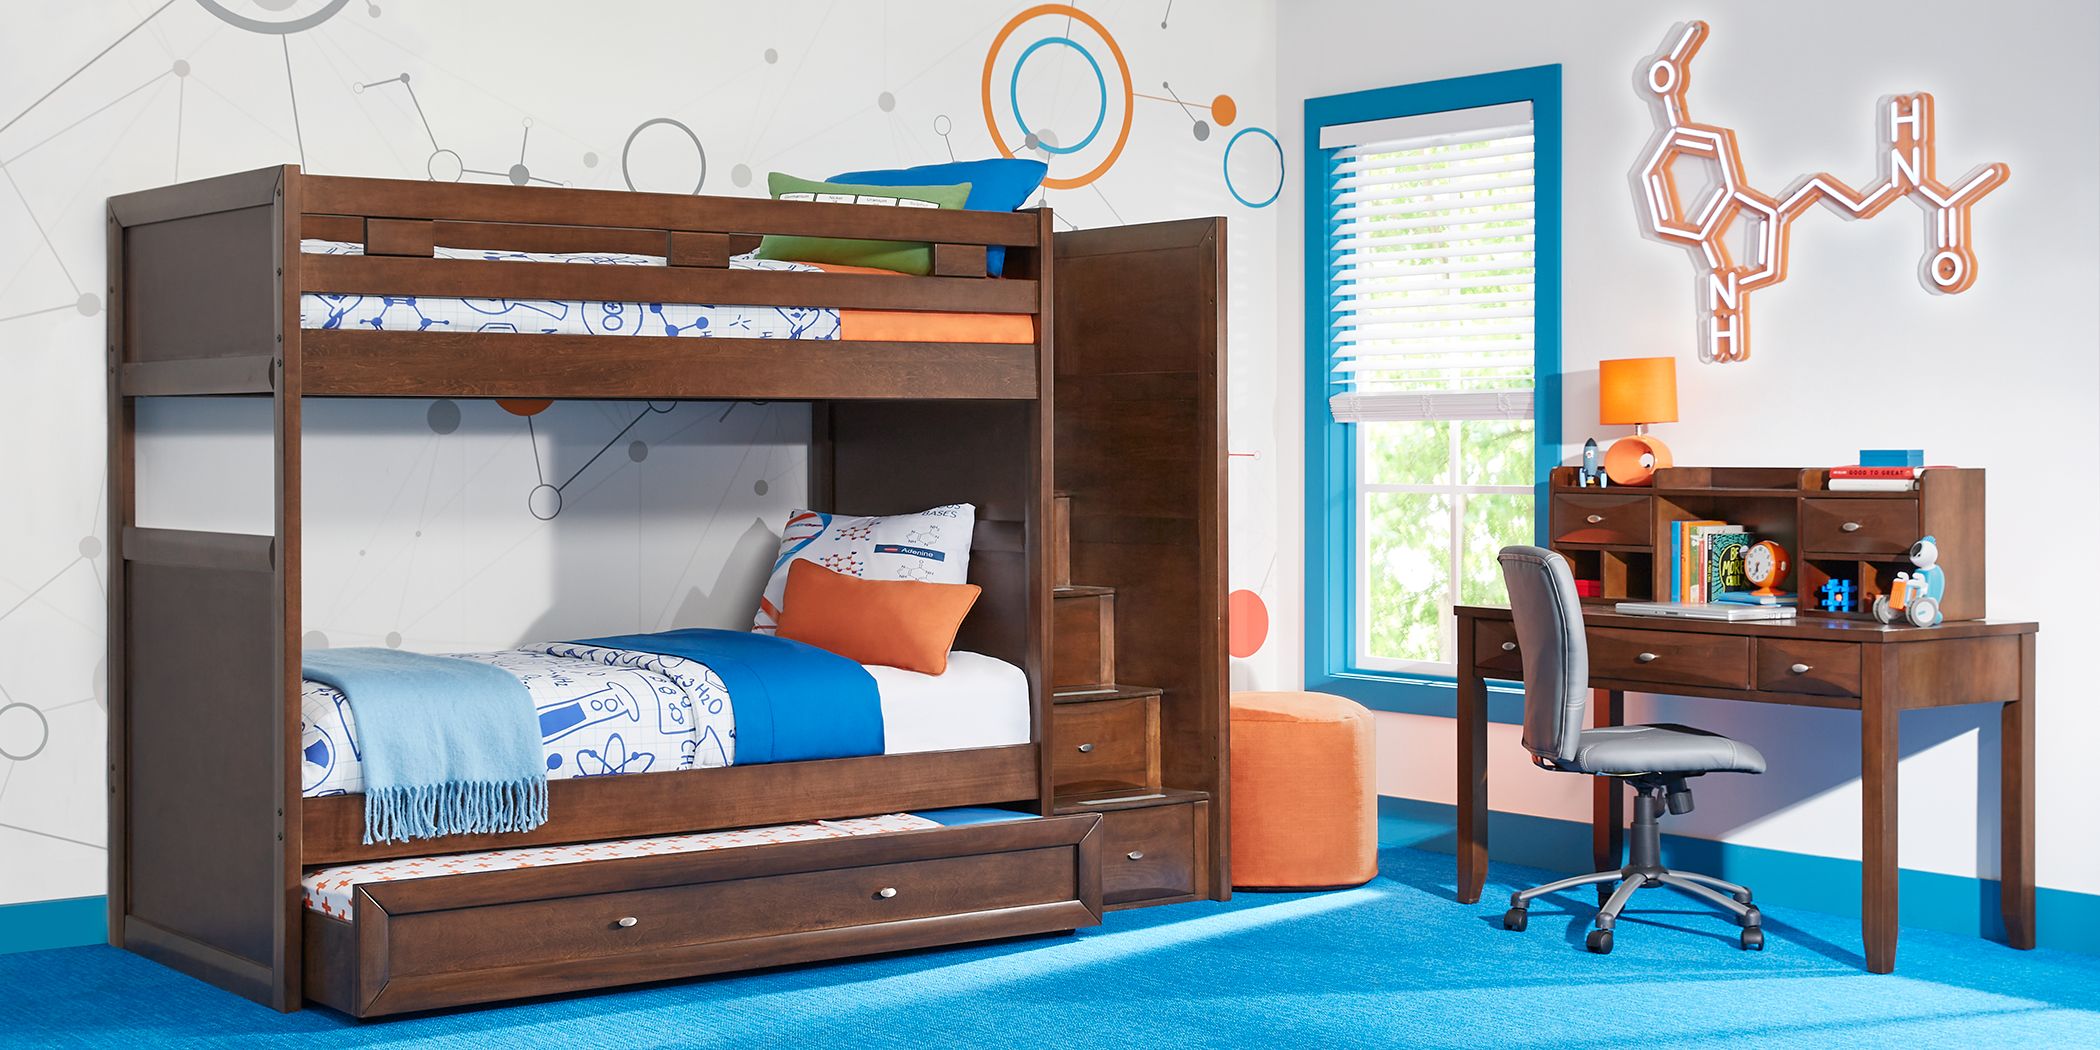 2 0 Walnut Twin Step Bunk Bed, Ivy League Twin Step Bunk Bed